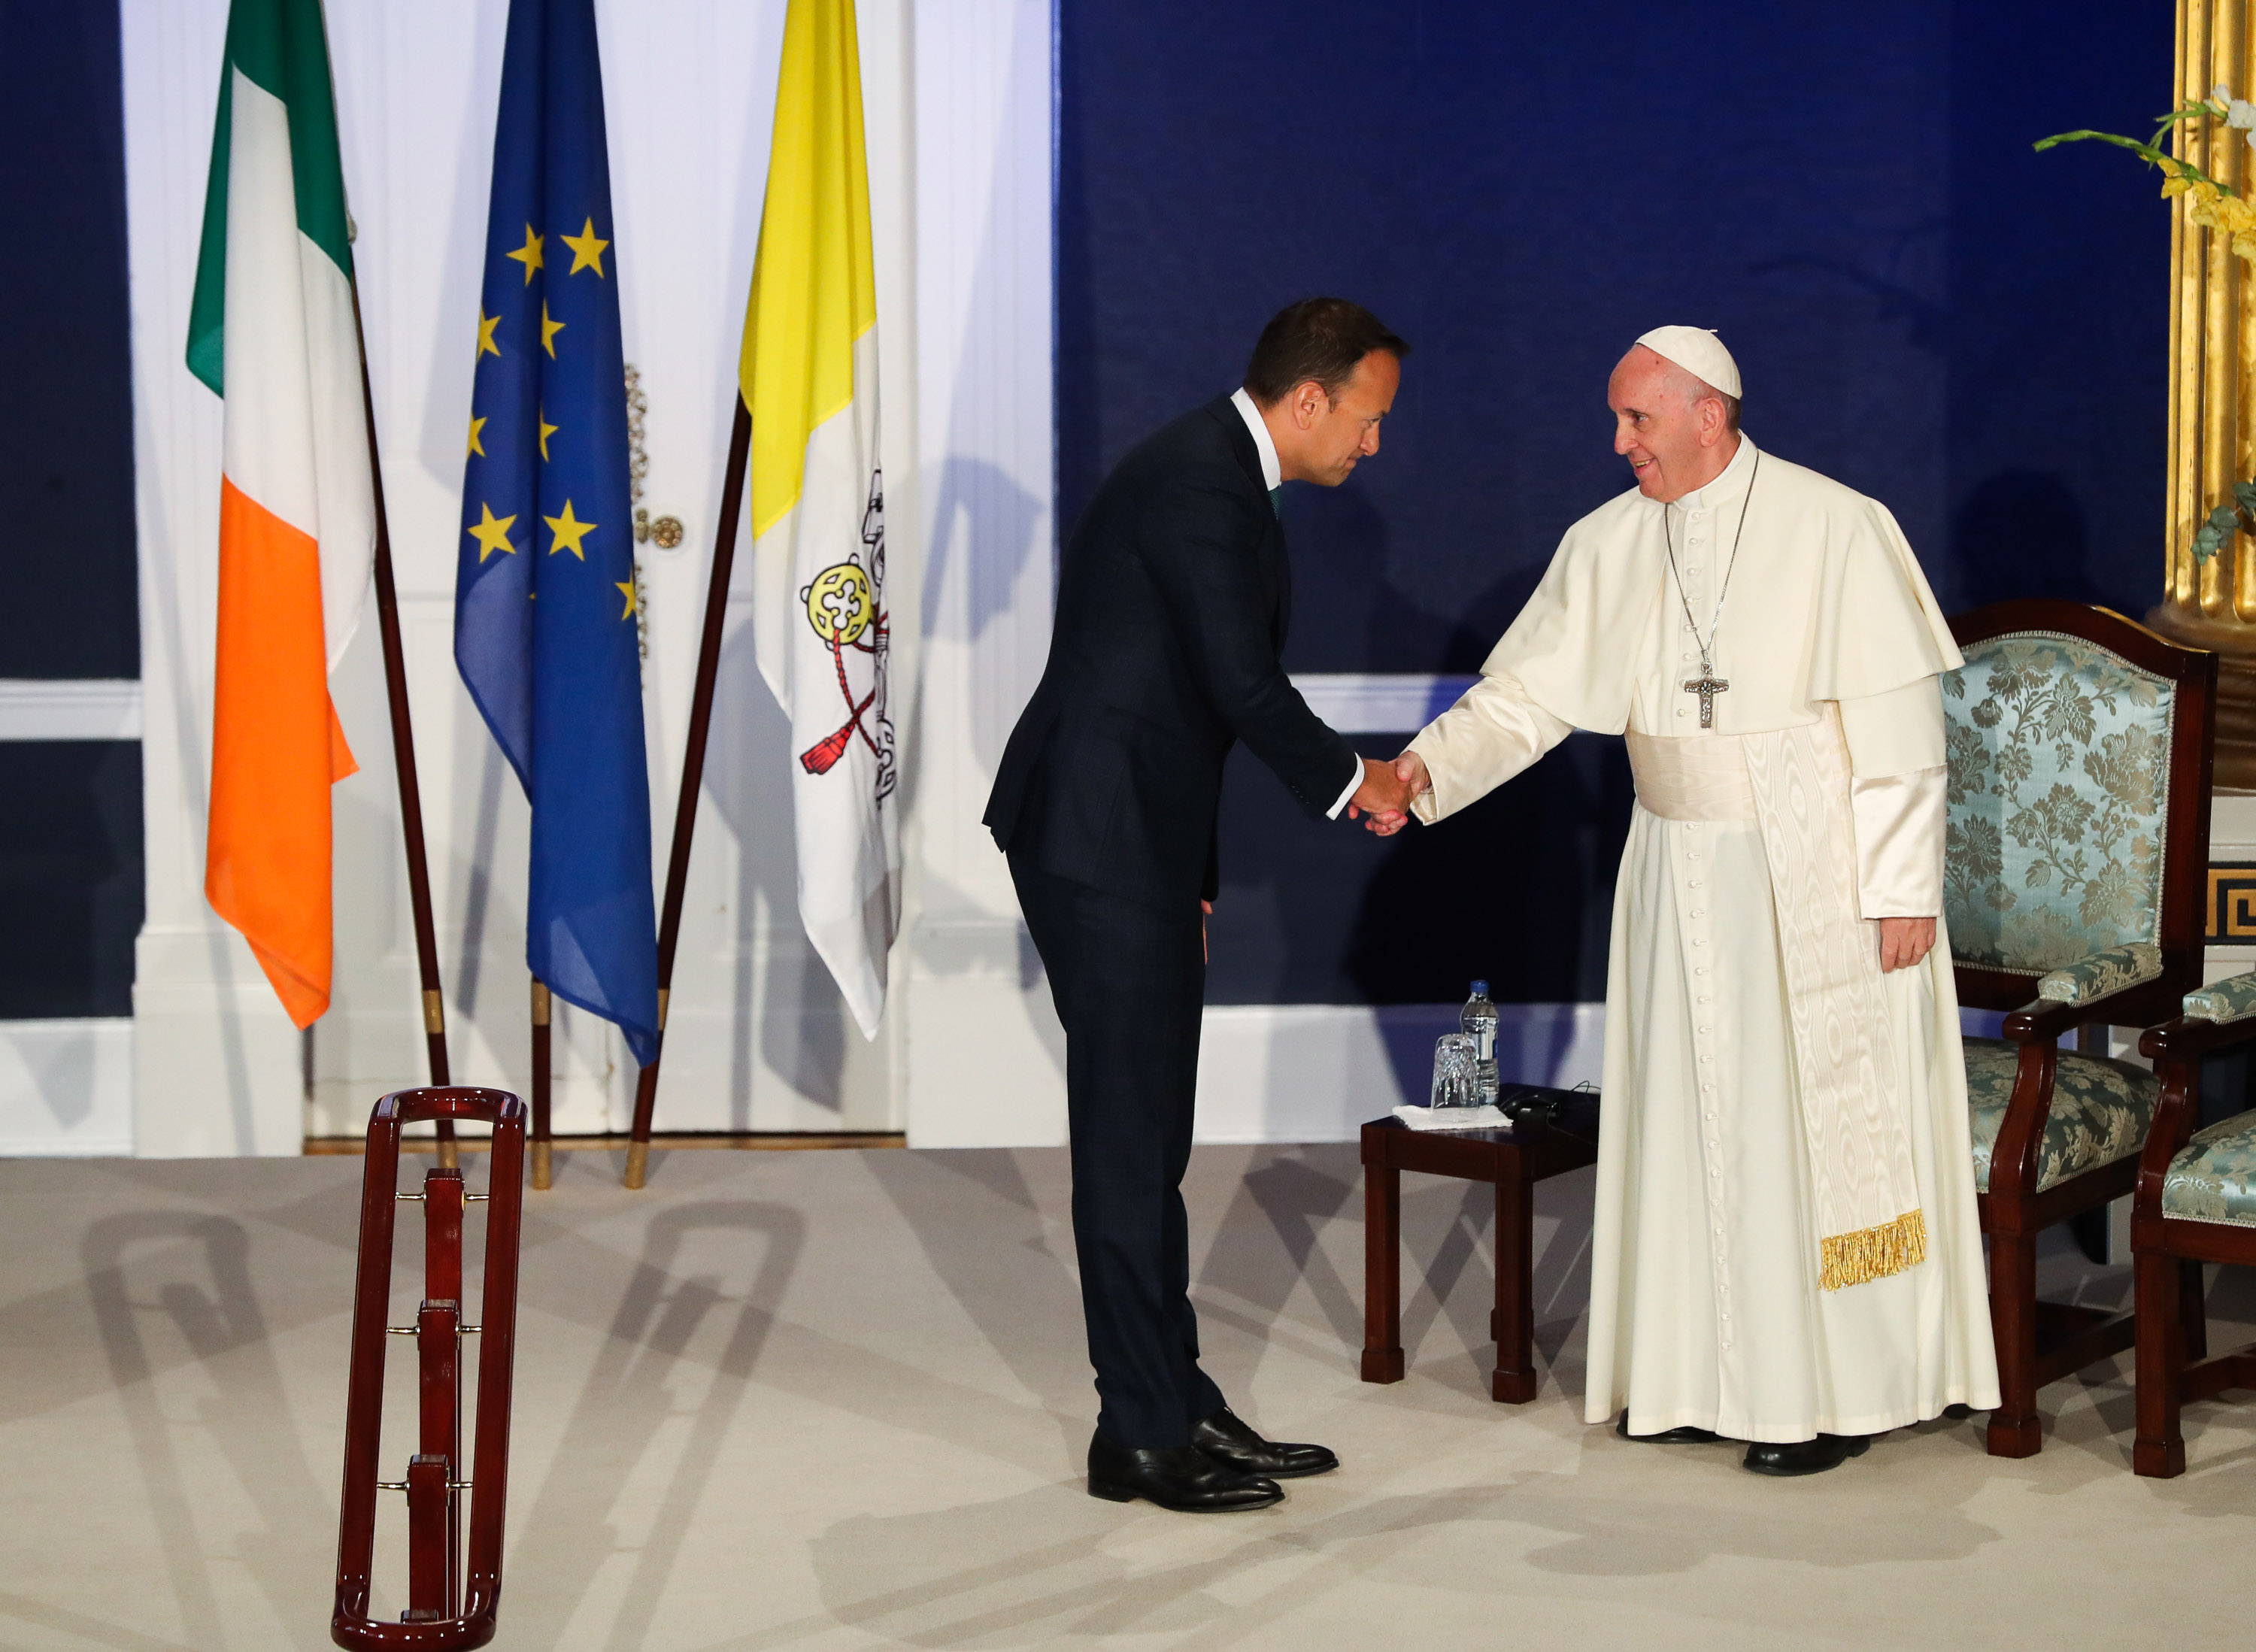 Pope and Taoiseach reference legacy of St Columbanus